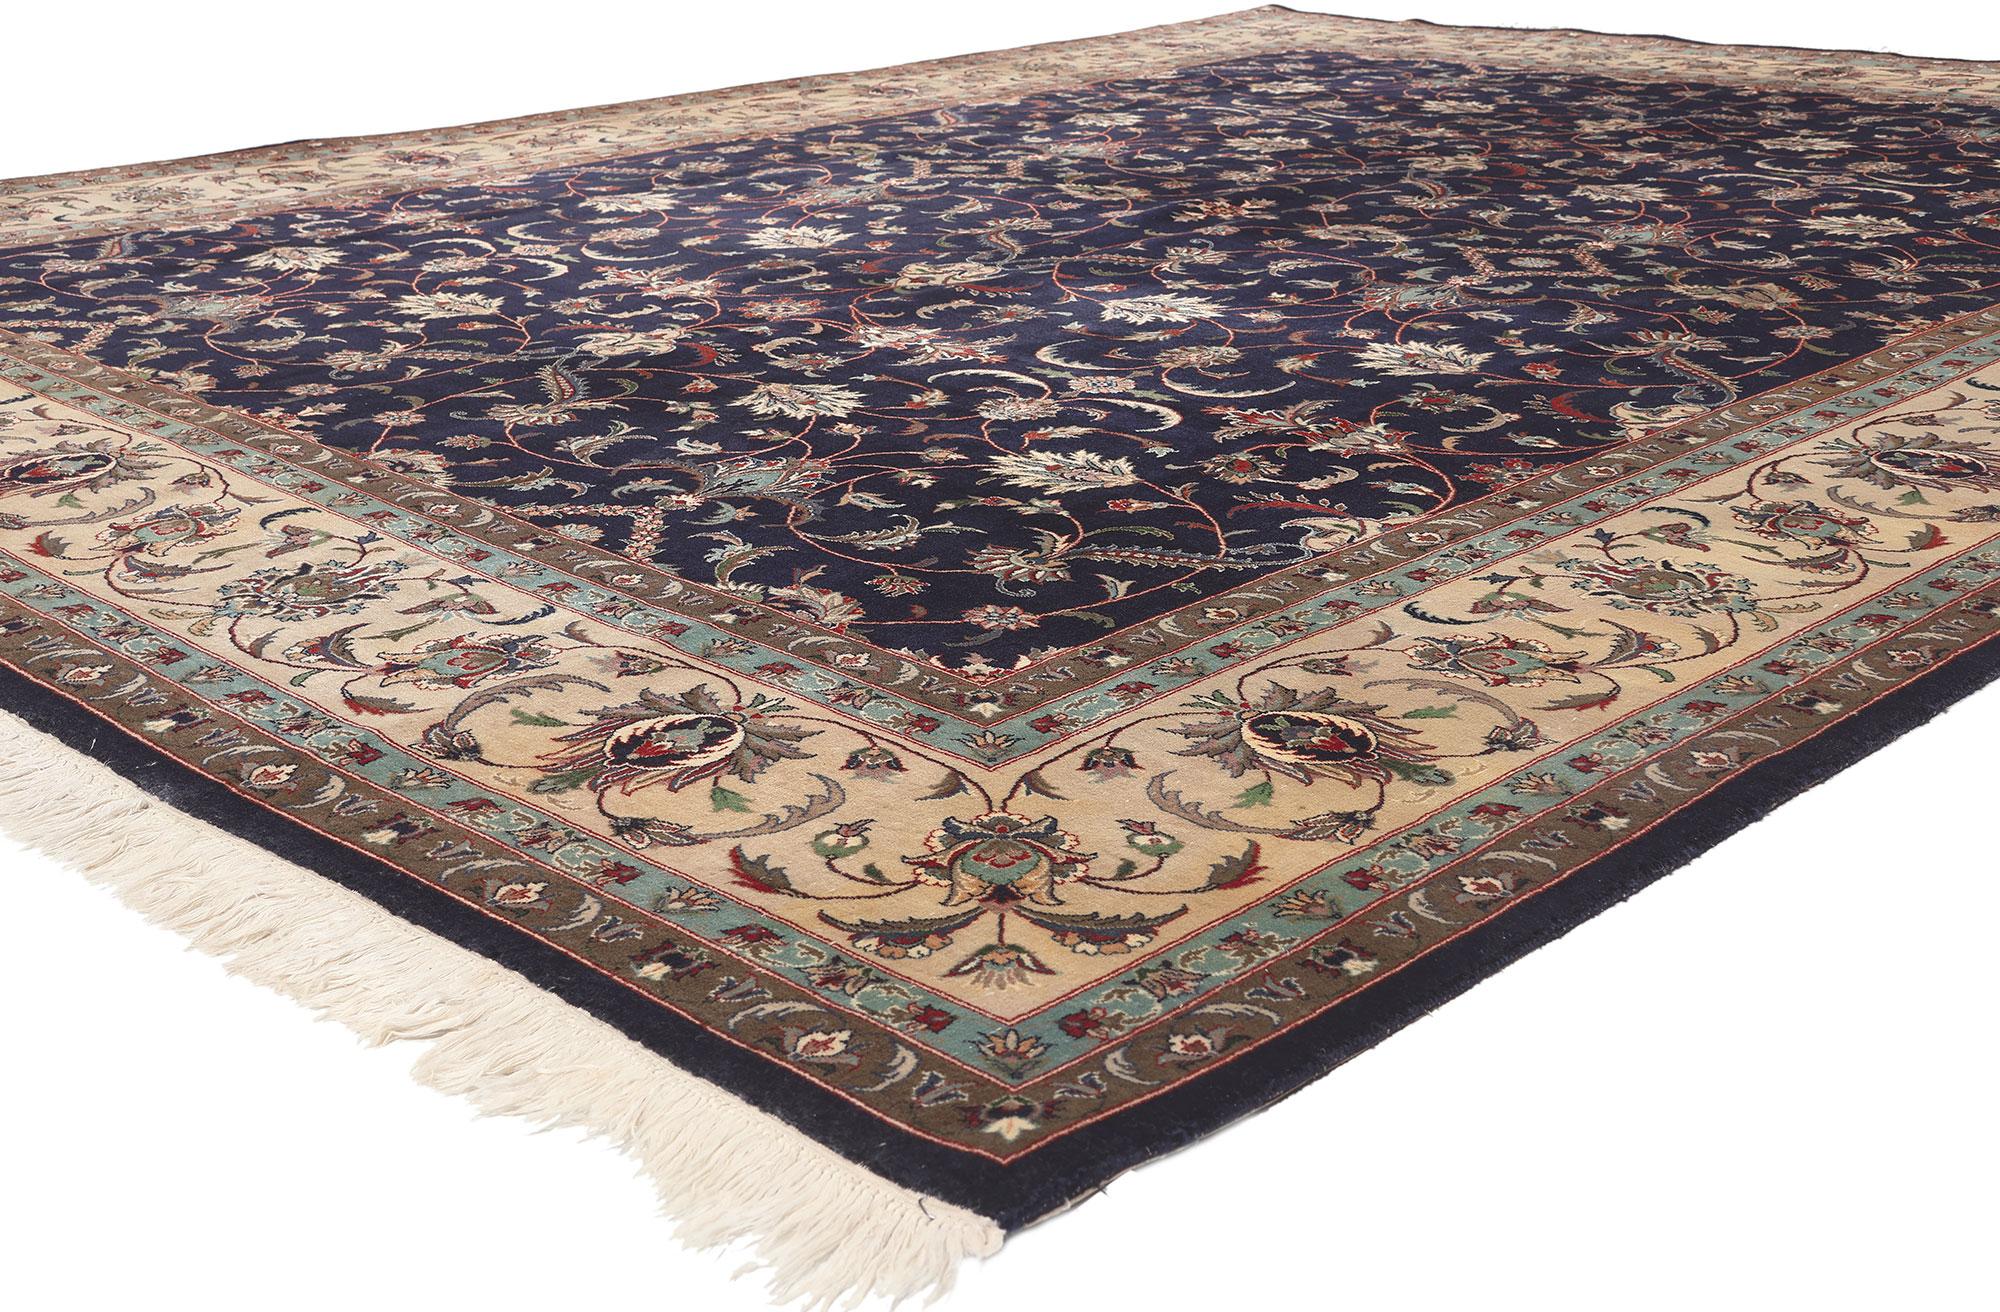 77081 Vintage Pakistani Rug, 09’02 x 11’10. 
Regal charm meets casual elegance in this vintage Pakistani rug. The intricate botanical design and sophisticated colors work together creating a look of pure decadence. An allover pattern composed of